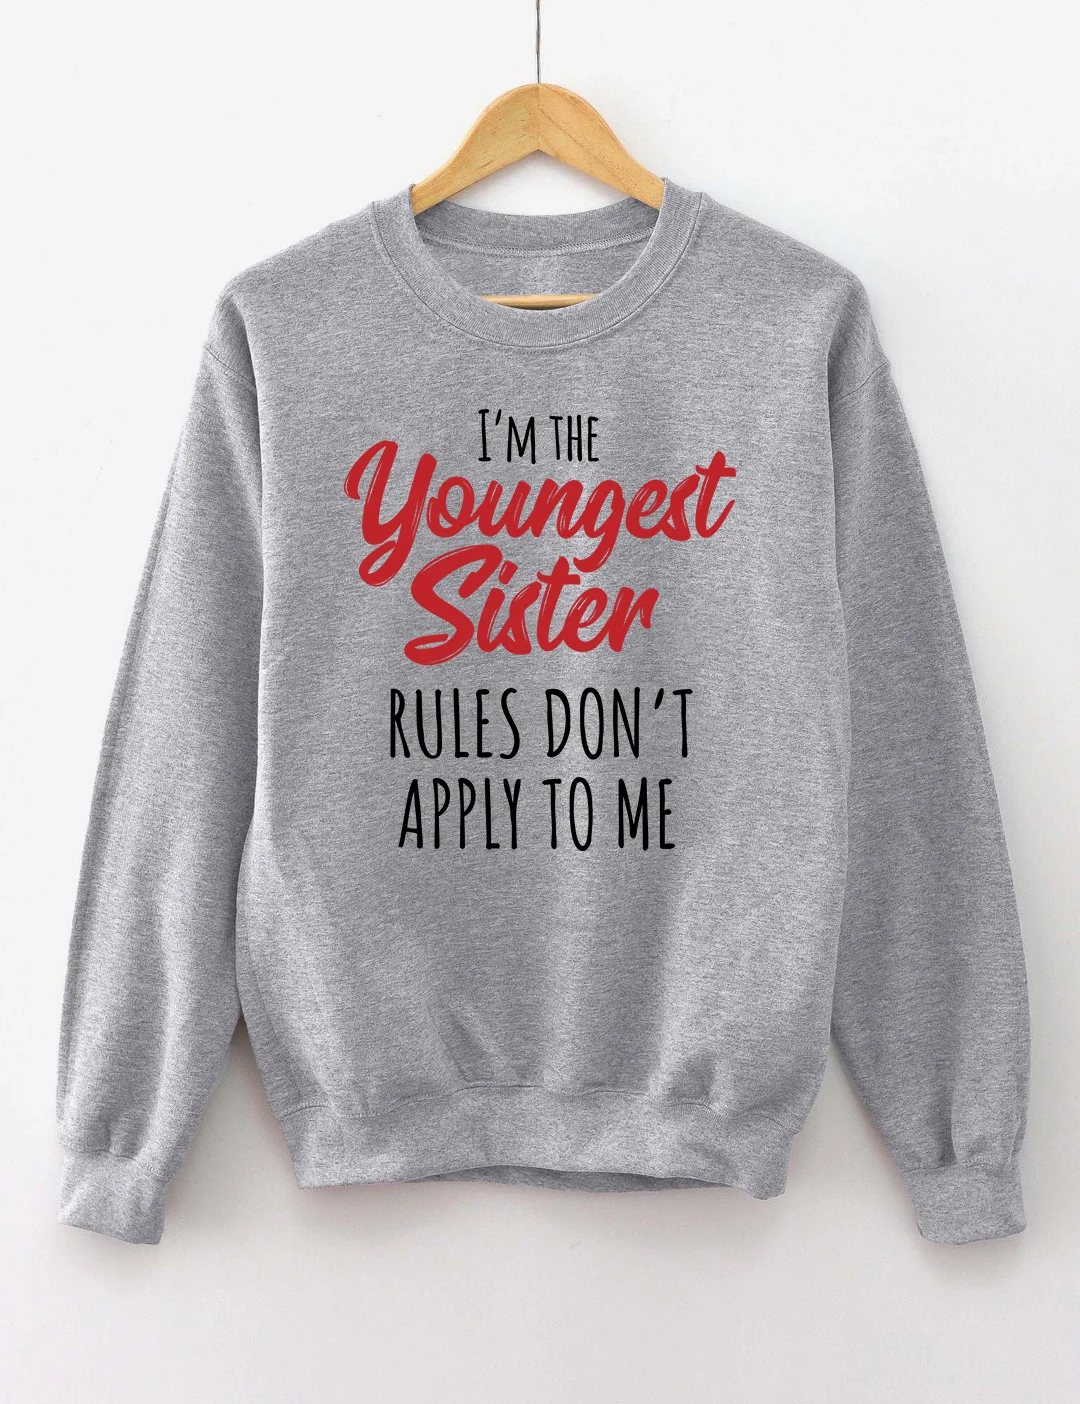 I'm The Youngest Sister The Rules Don't Apply To Me Sweatshirt